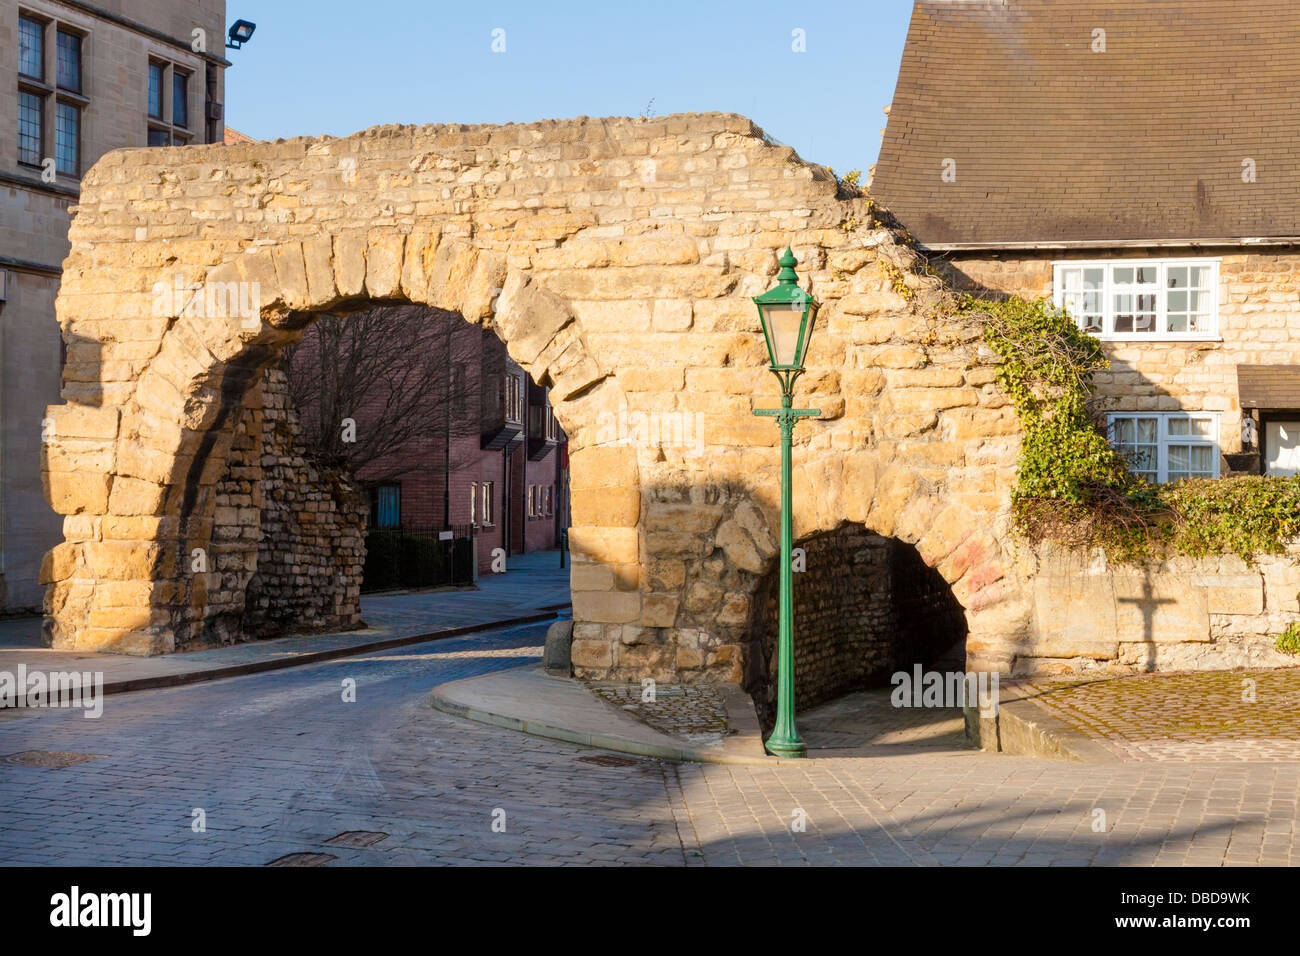 Newport Arch, Bailgate, Lincoln, England, UK. The remains of a 3rd century Roman gate. Stock Photo